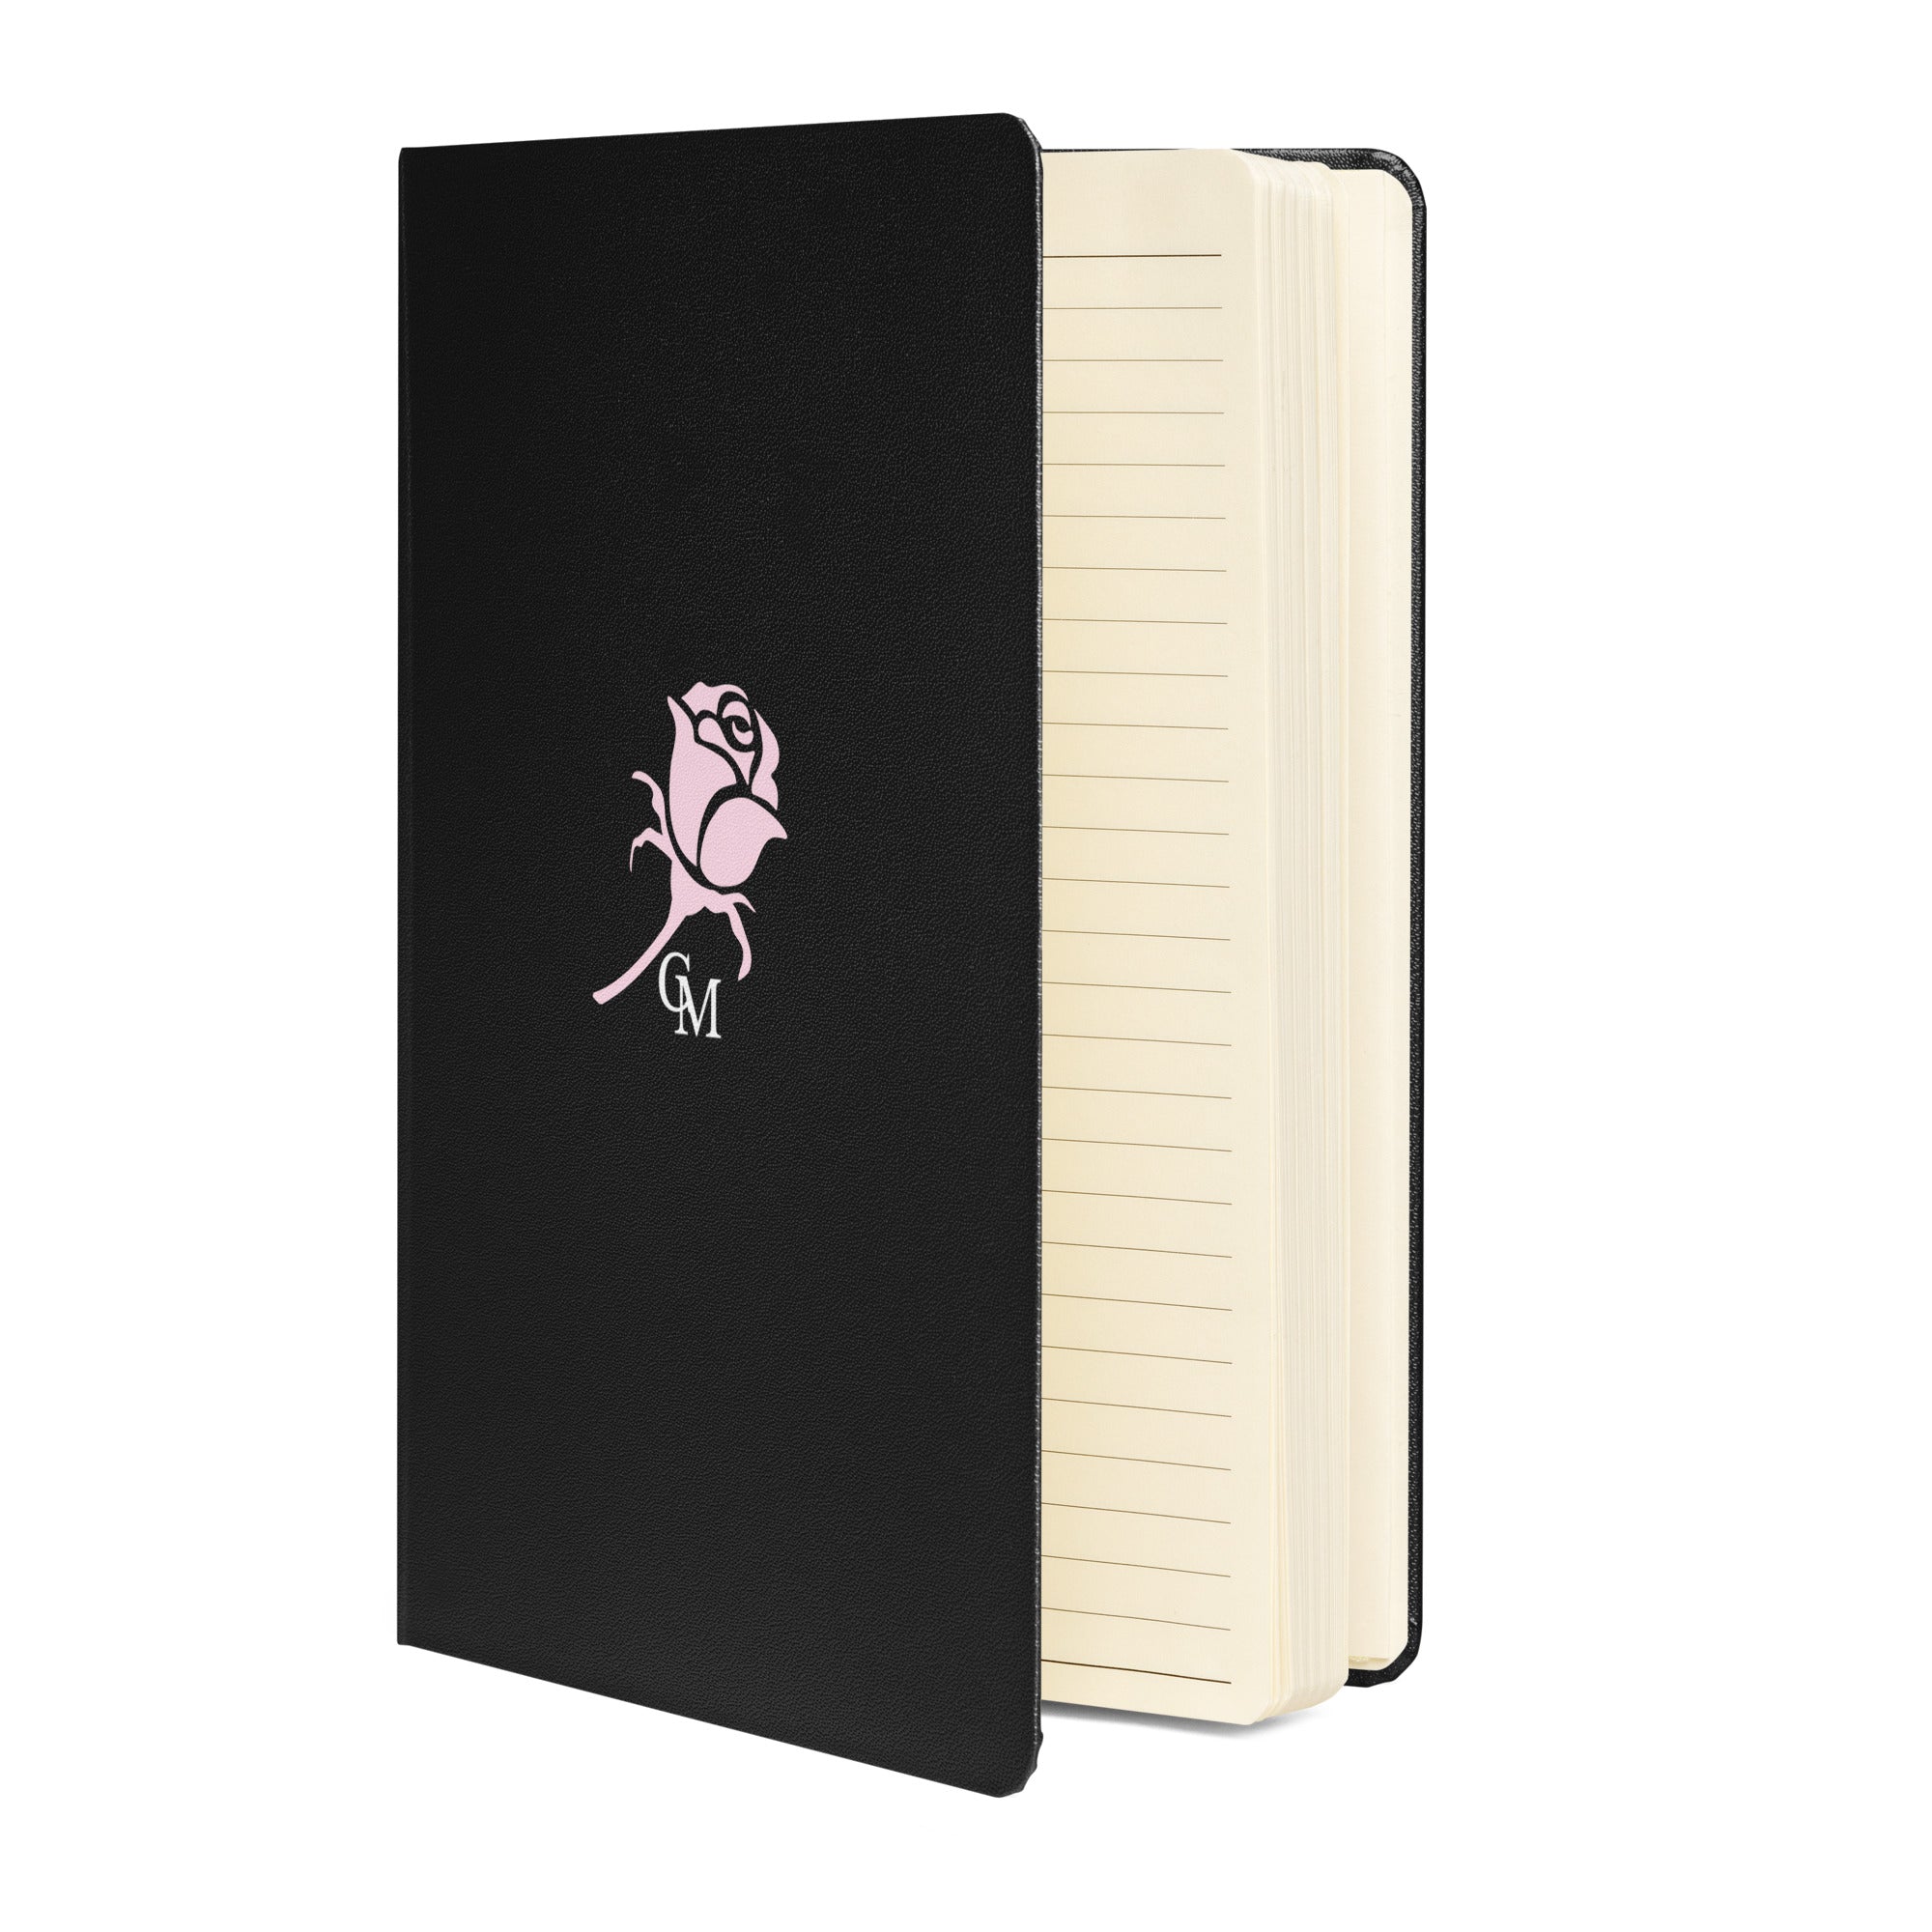 CM Pink Road Hardcover bound journal/notebook